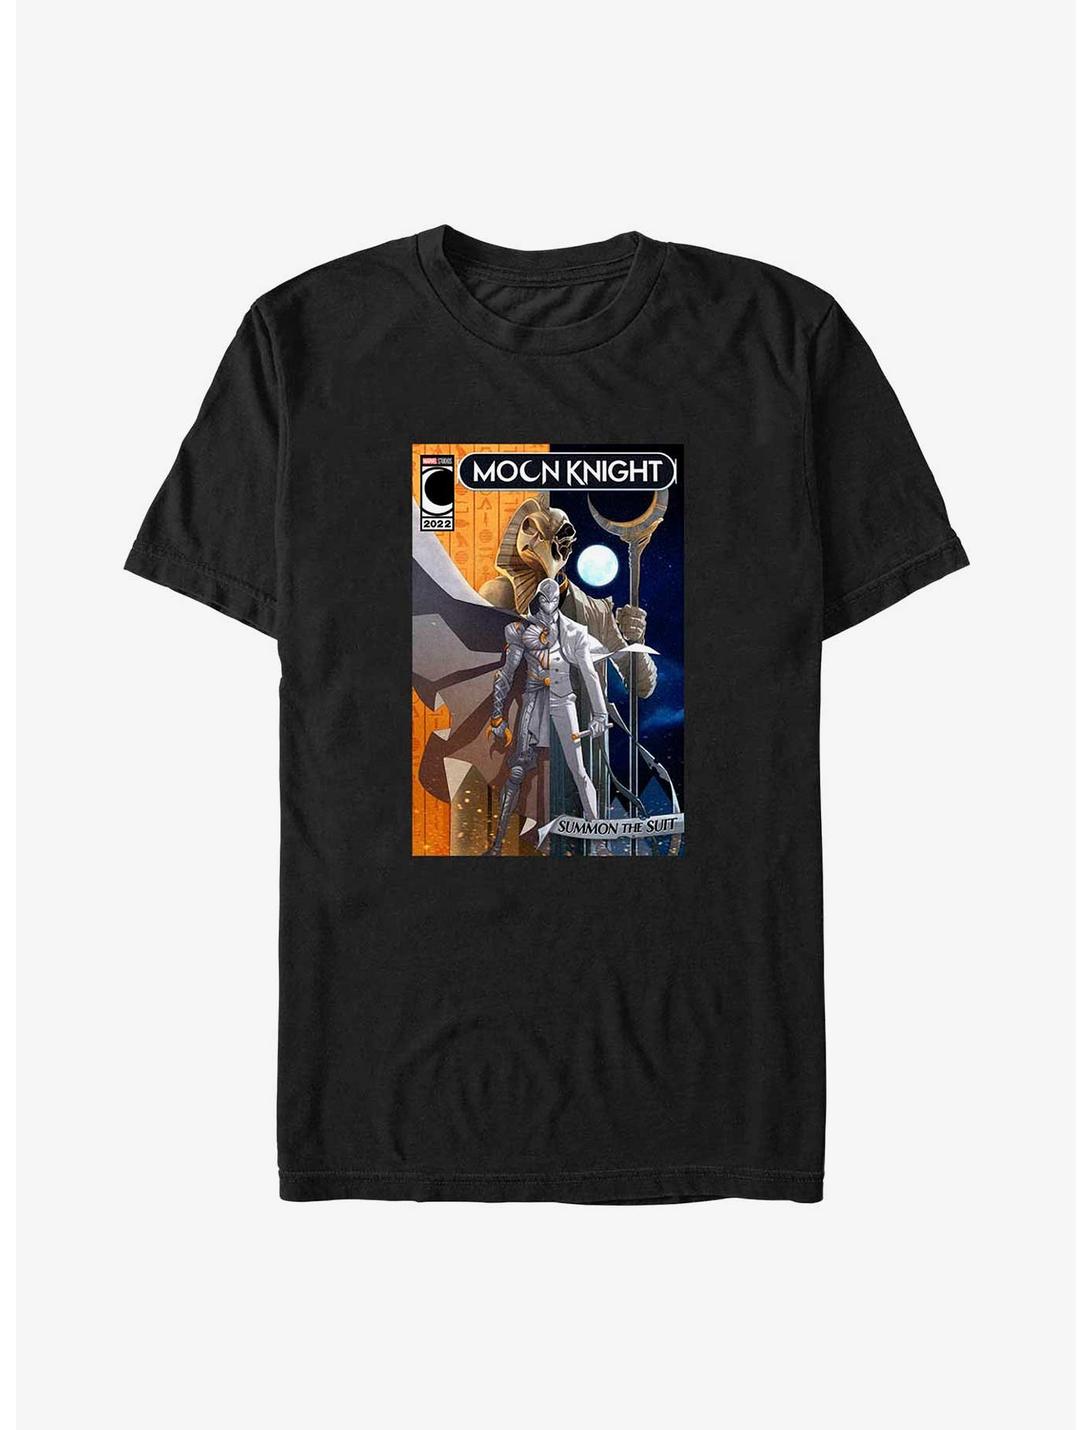 Marvel Moon Knight Summon The Suit Poster Big & Tall T-Shirt, BLACK, hi-res